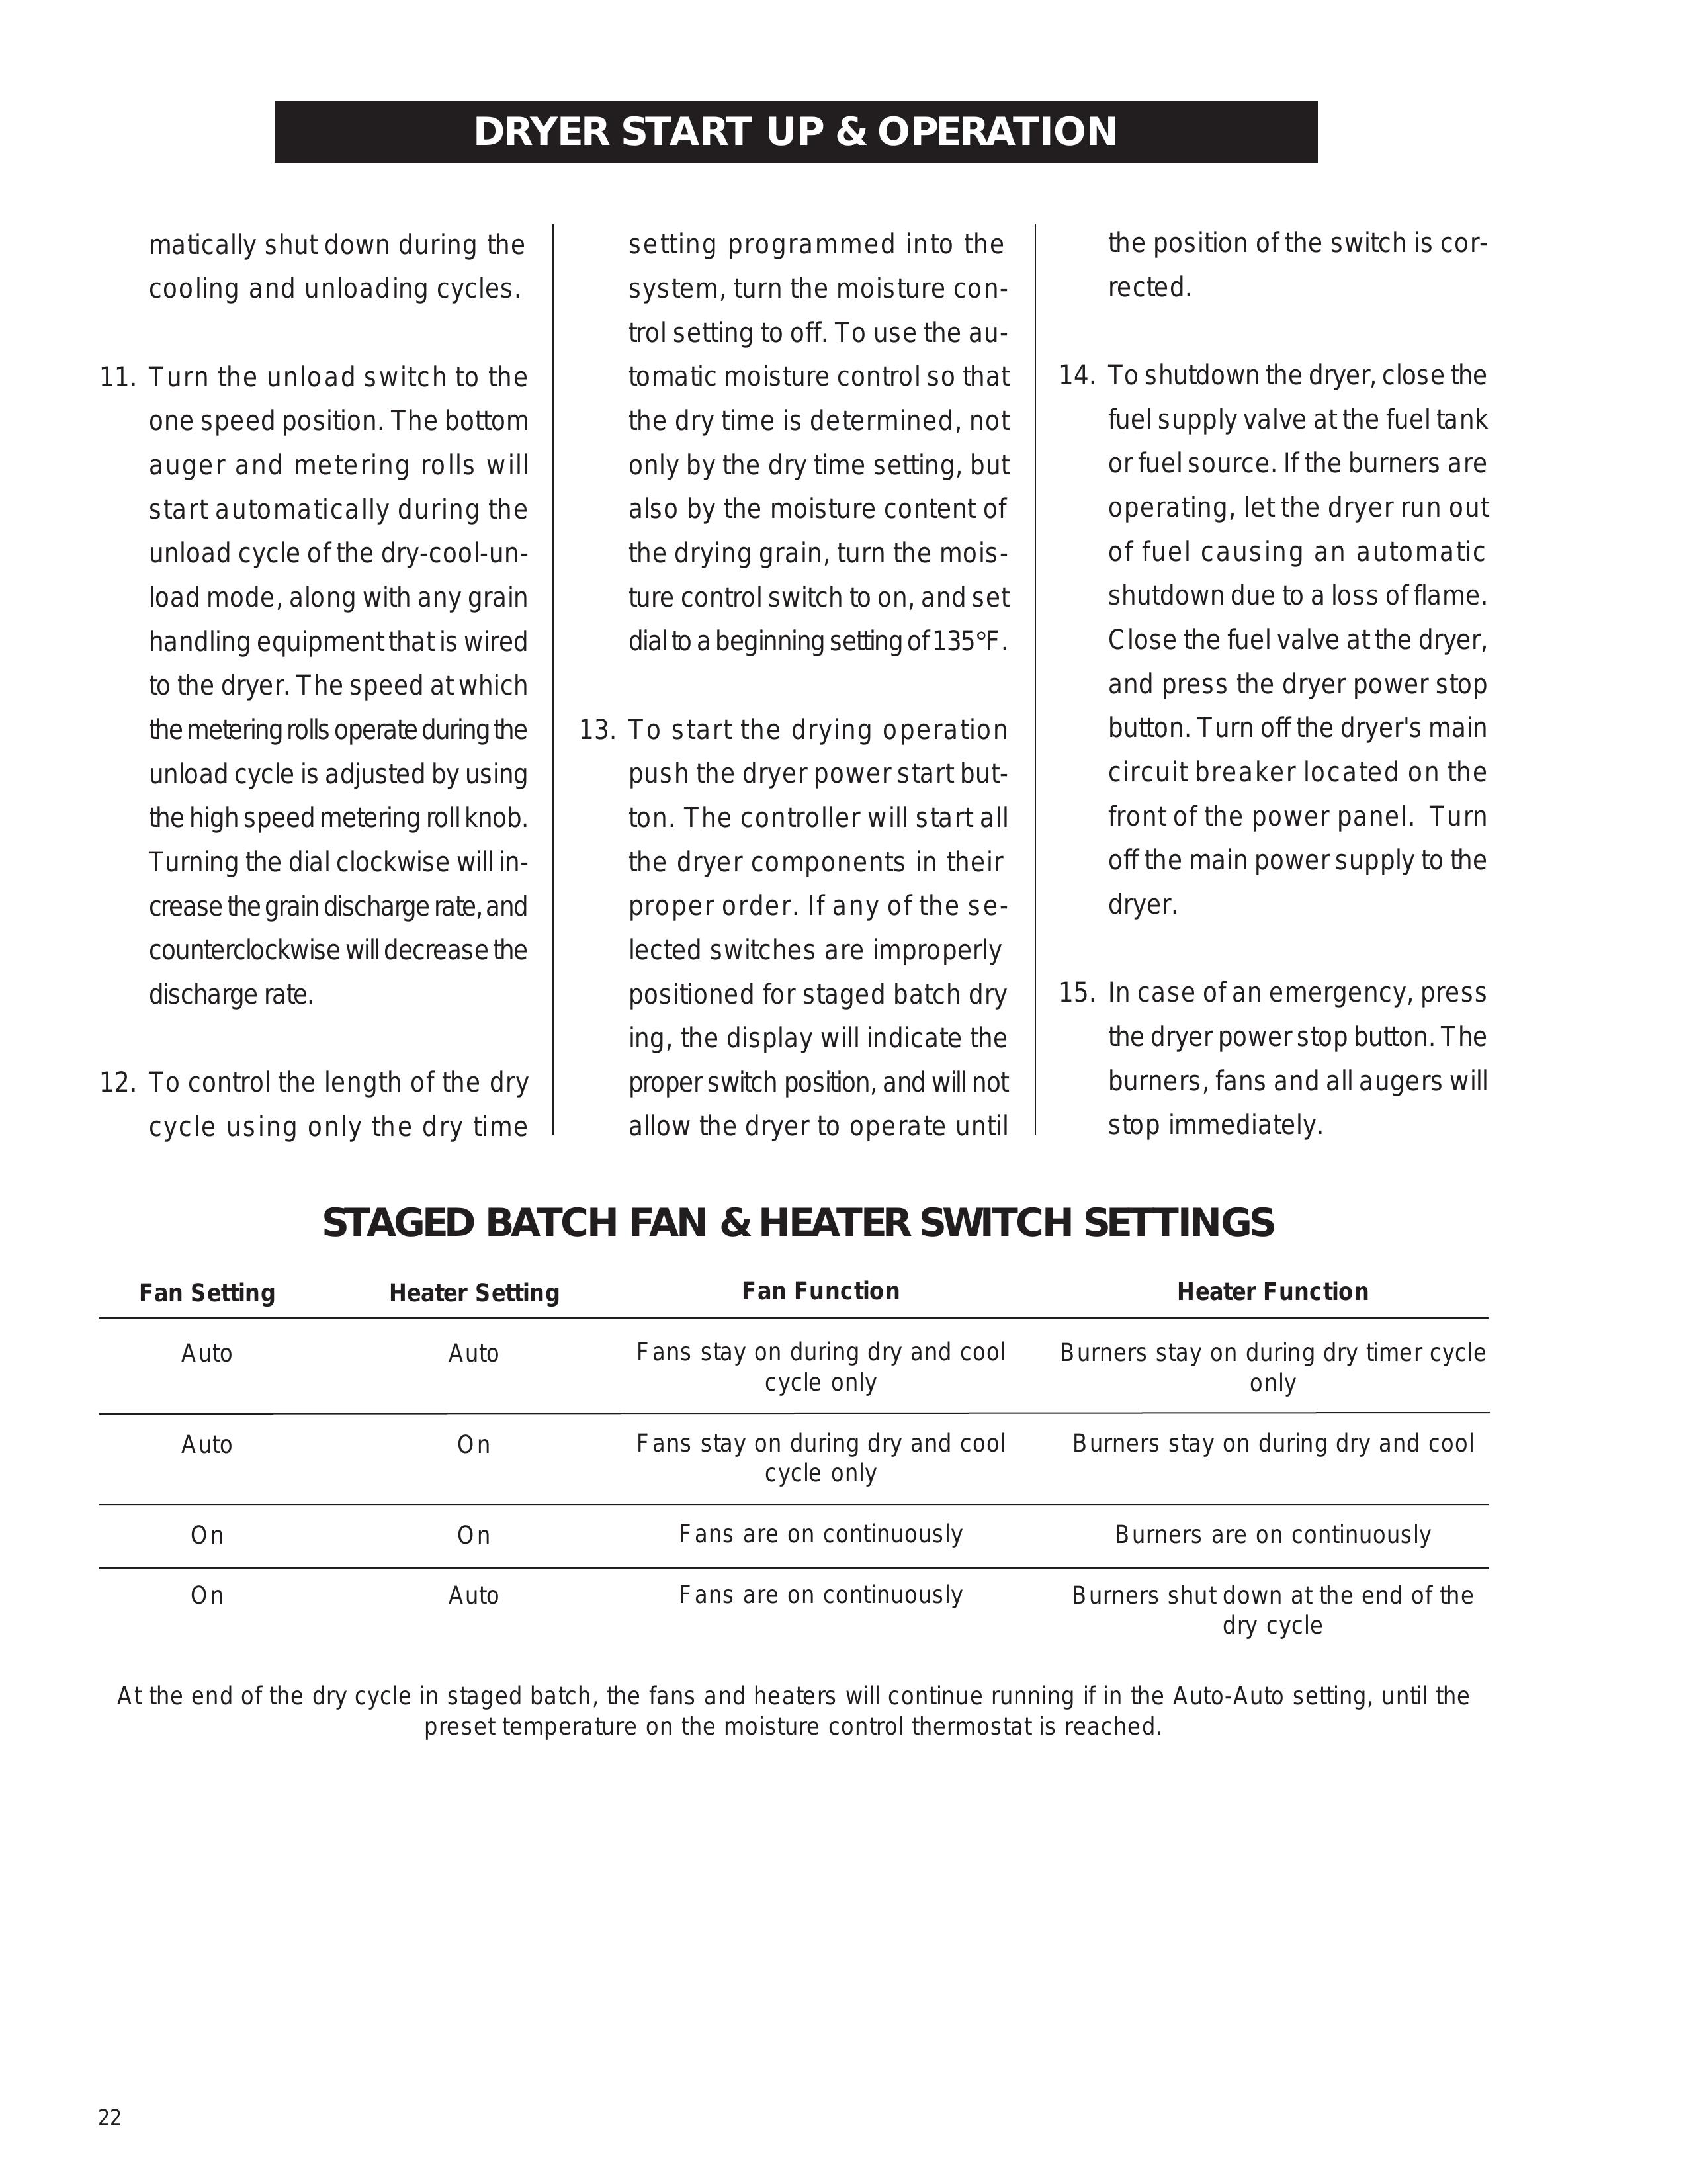 Airstream PNEG-343 Clothes Dryer User Manual (Page 22)